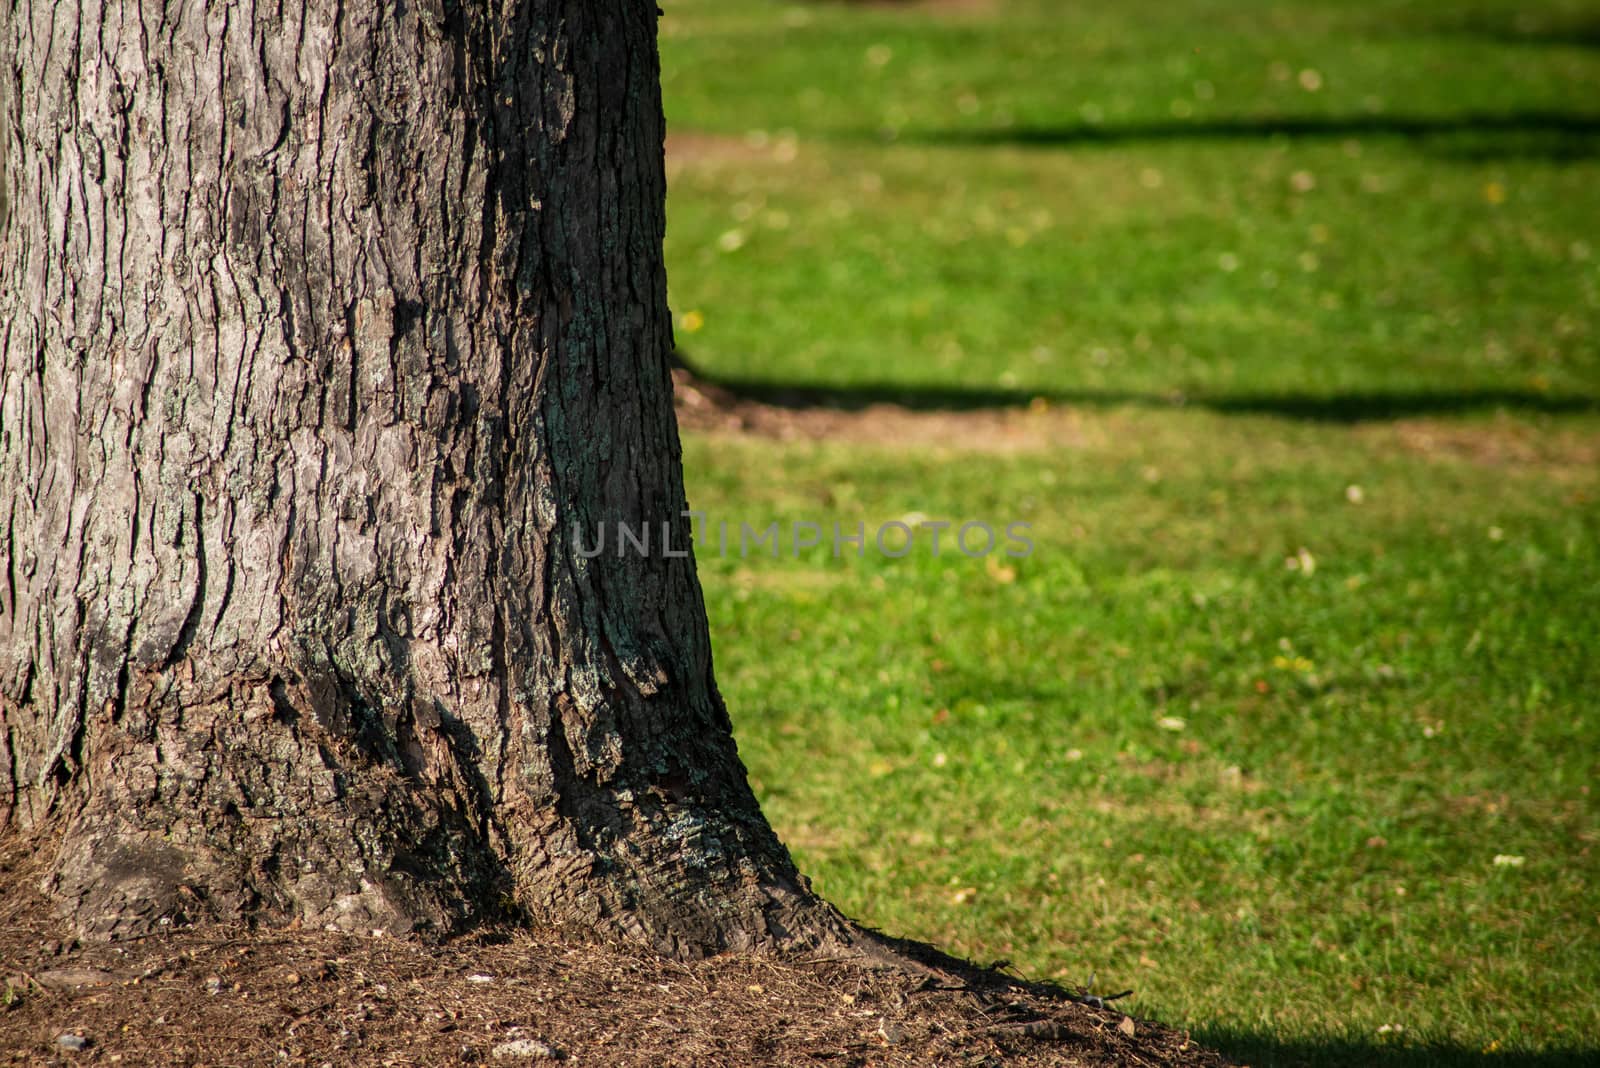 Reough textured tree bark and soft green grass by marysalen